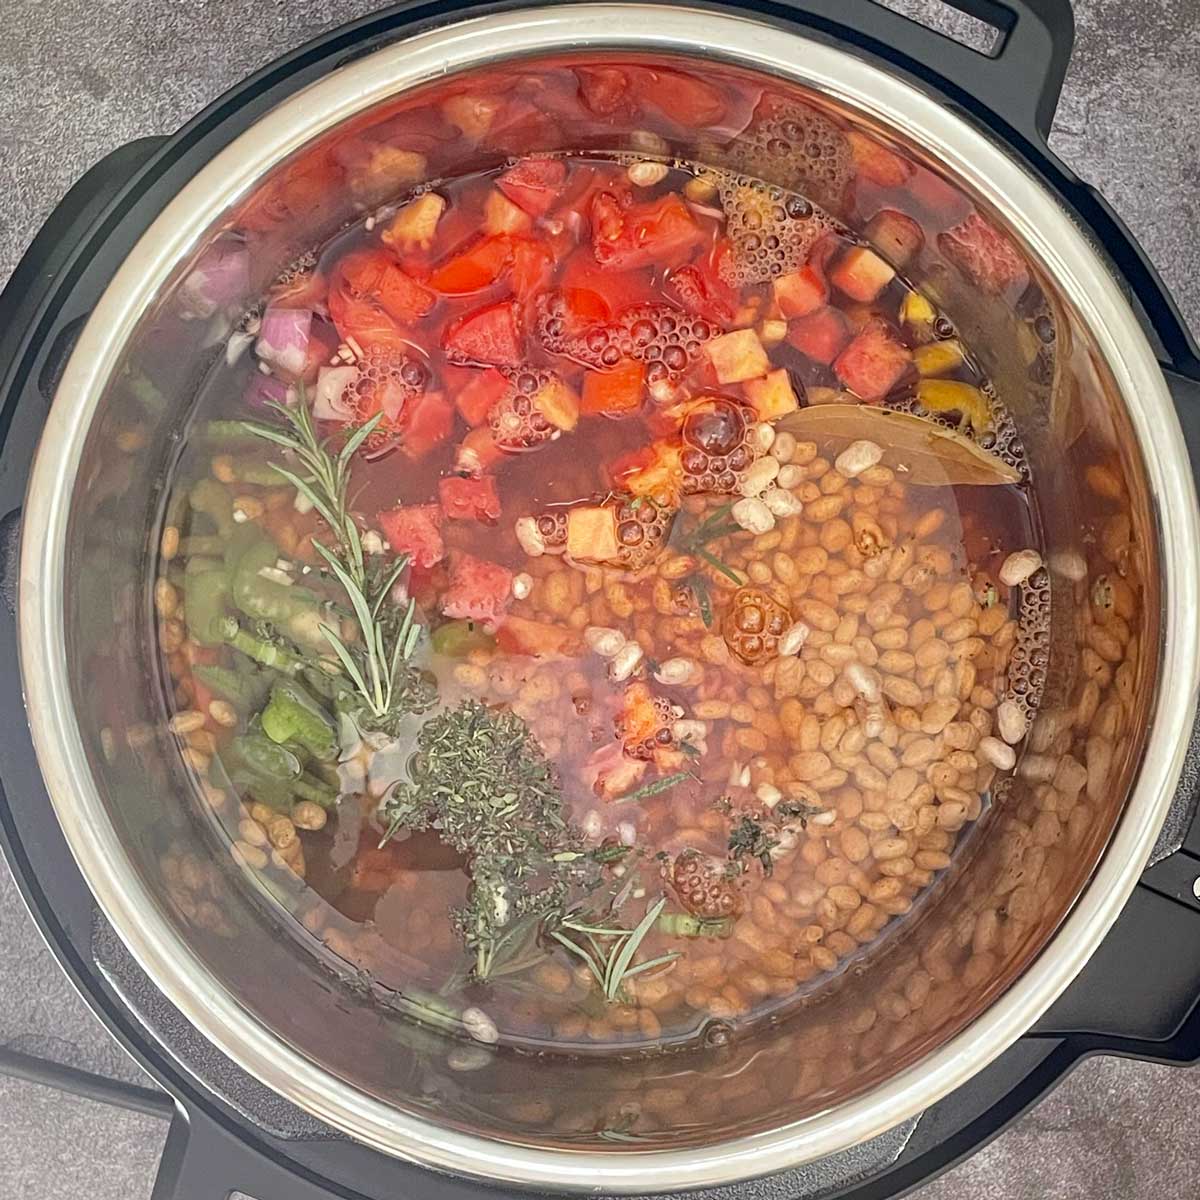 All ingredients of Navy beans soup.